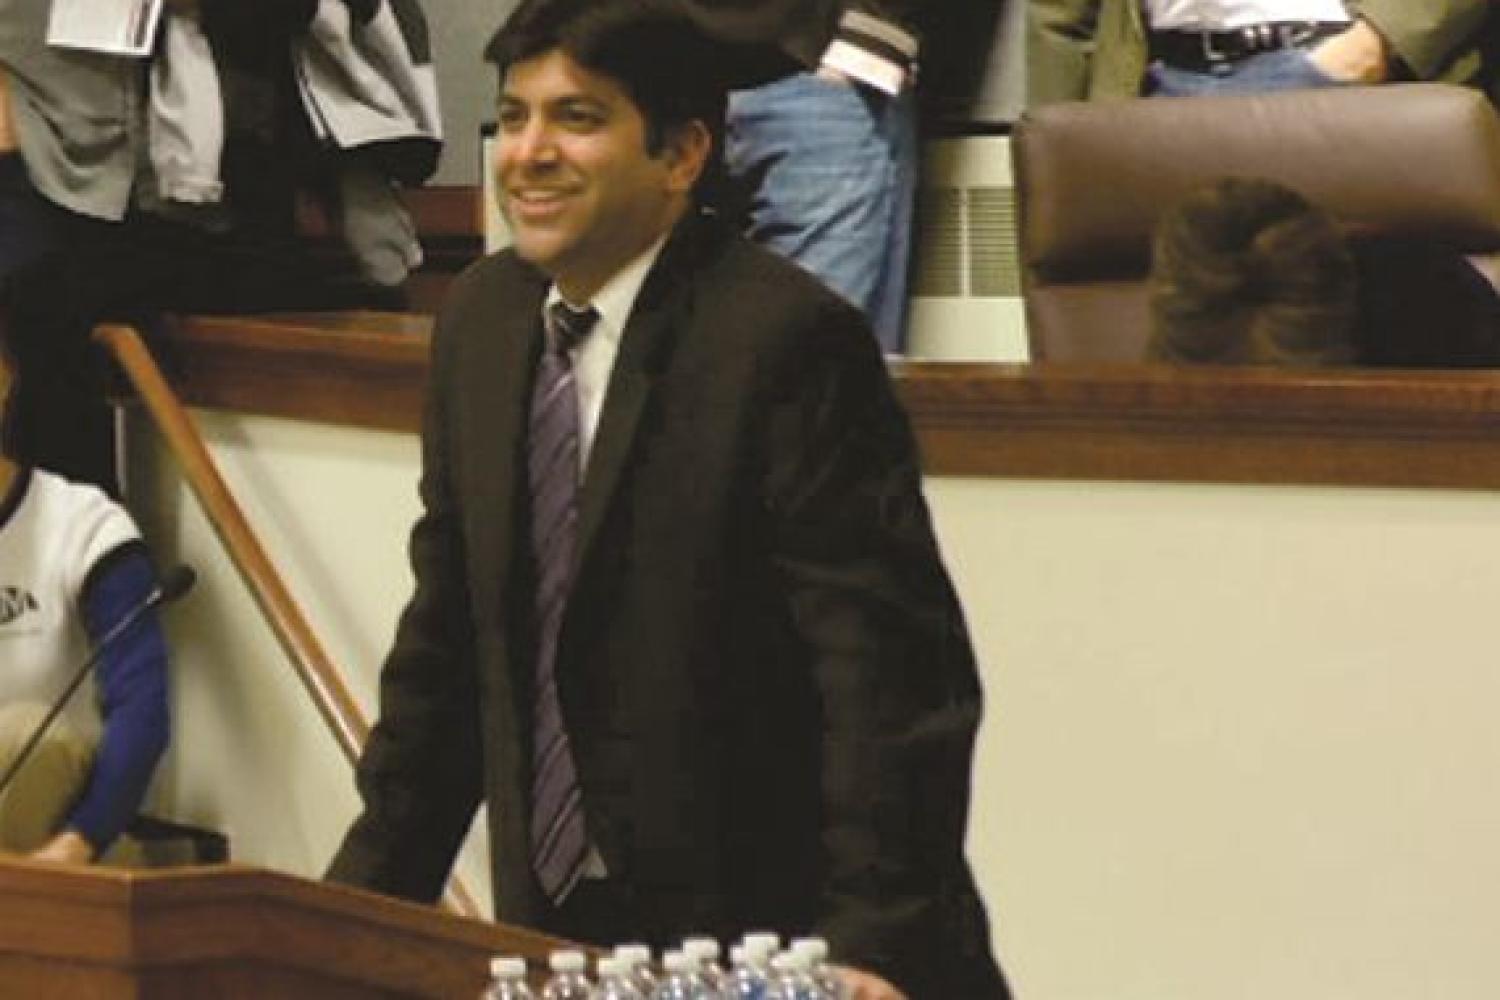 Startup Colorado engages students and alums with an entrepreneurial spirit. White House Chief Technology Officer Aneesh Chopra spoke at the launch of Startup Colorado.